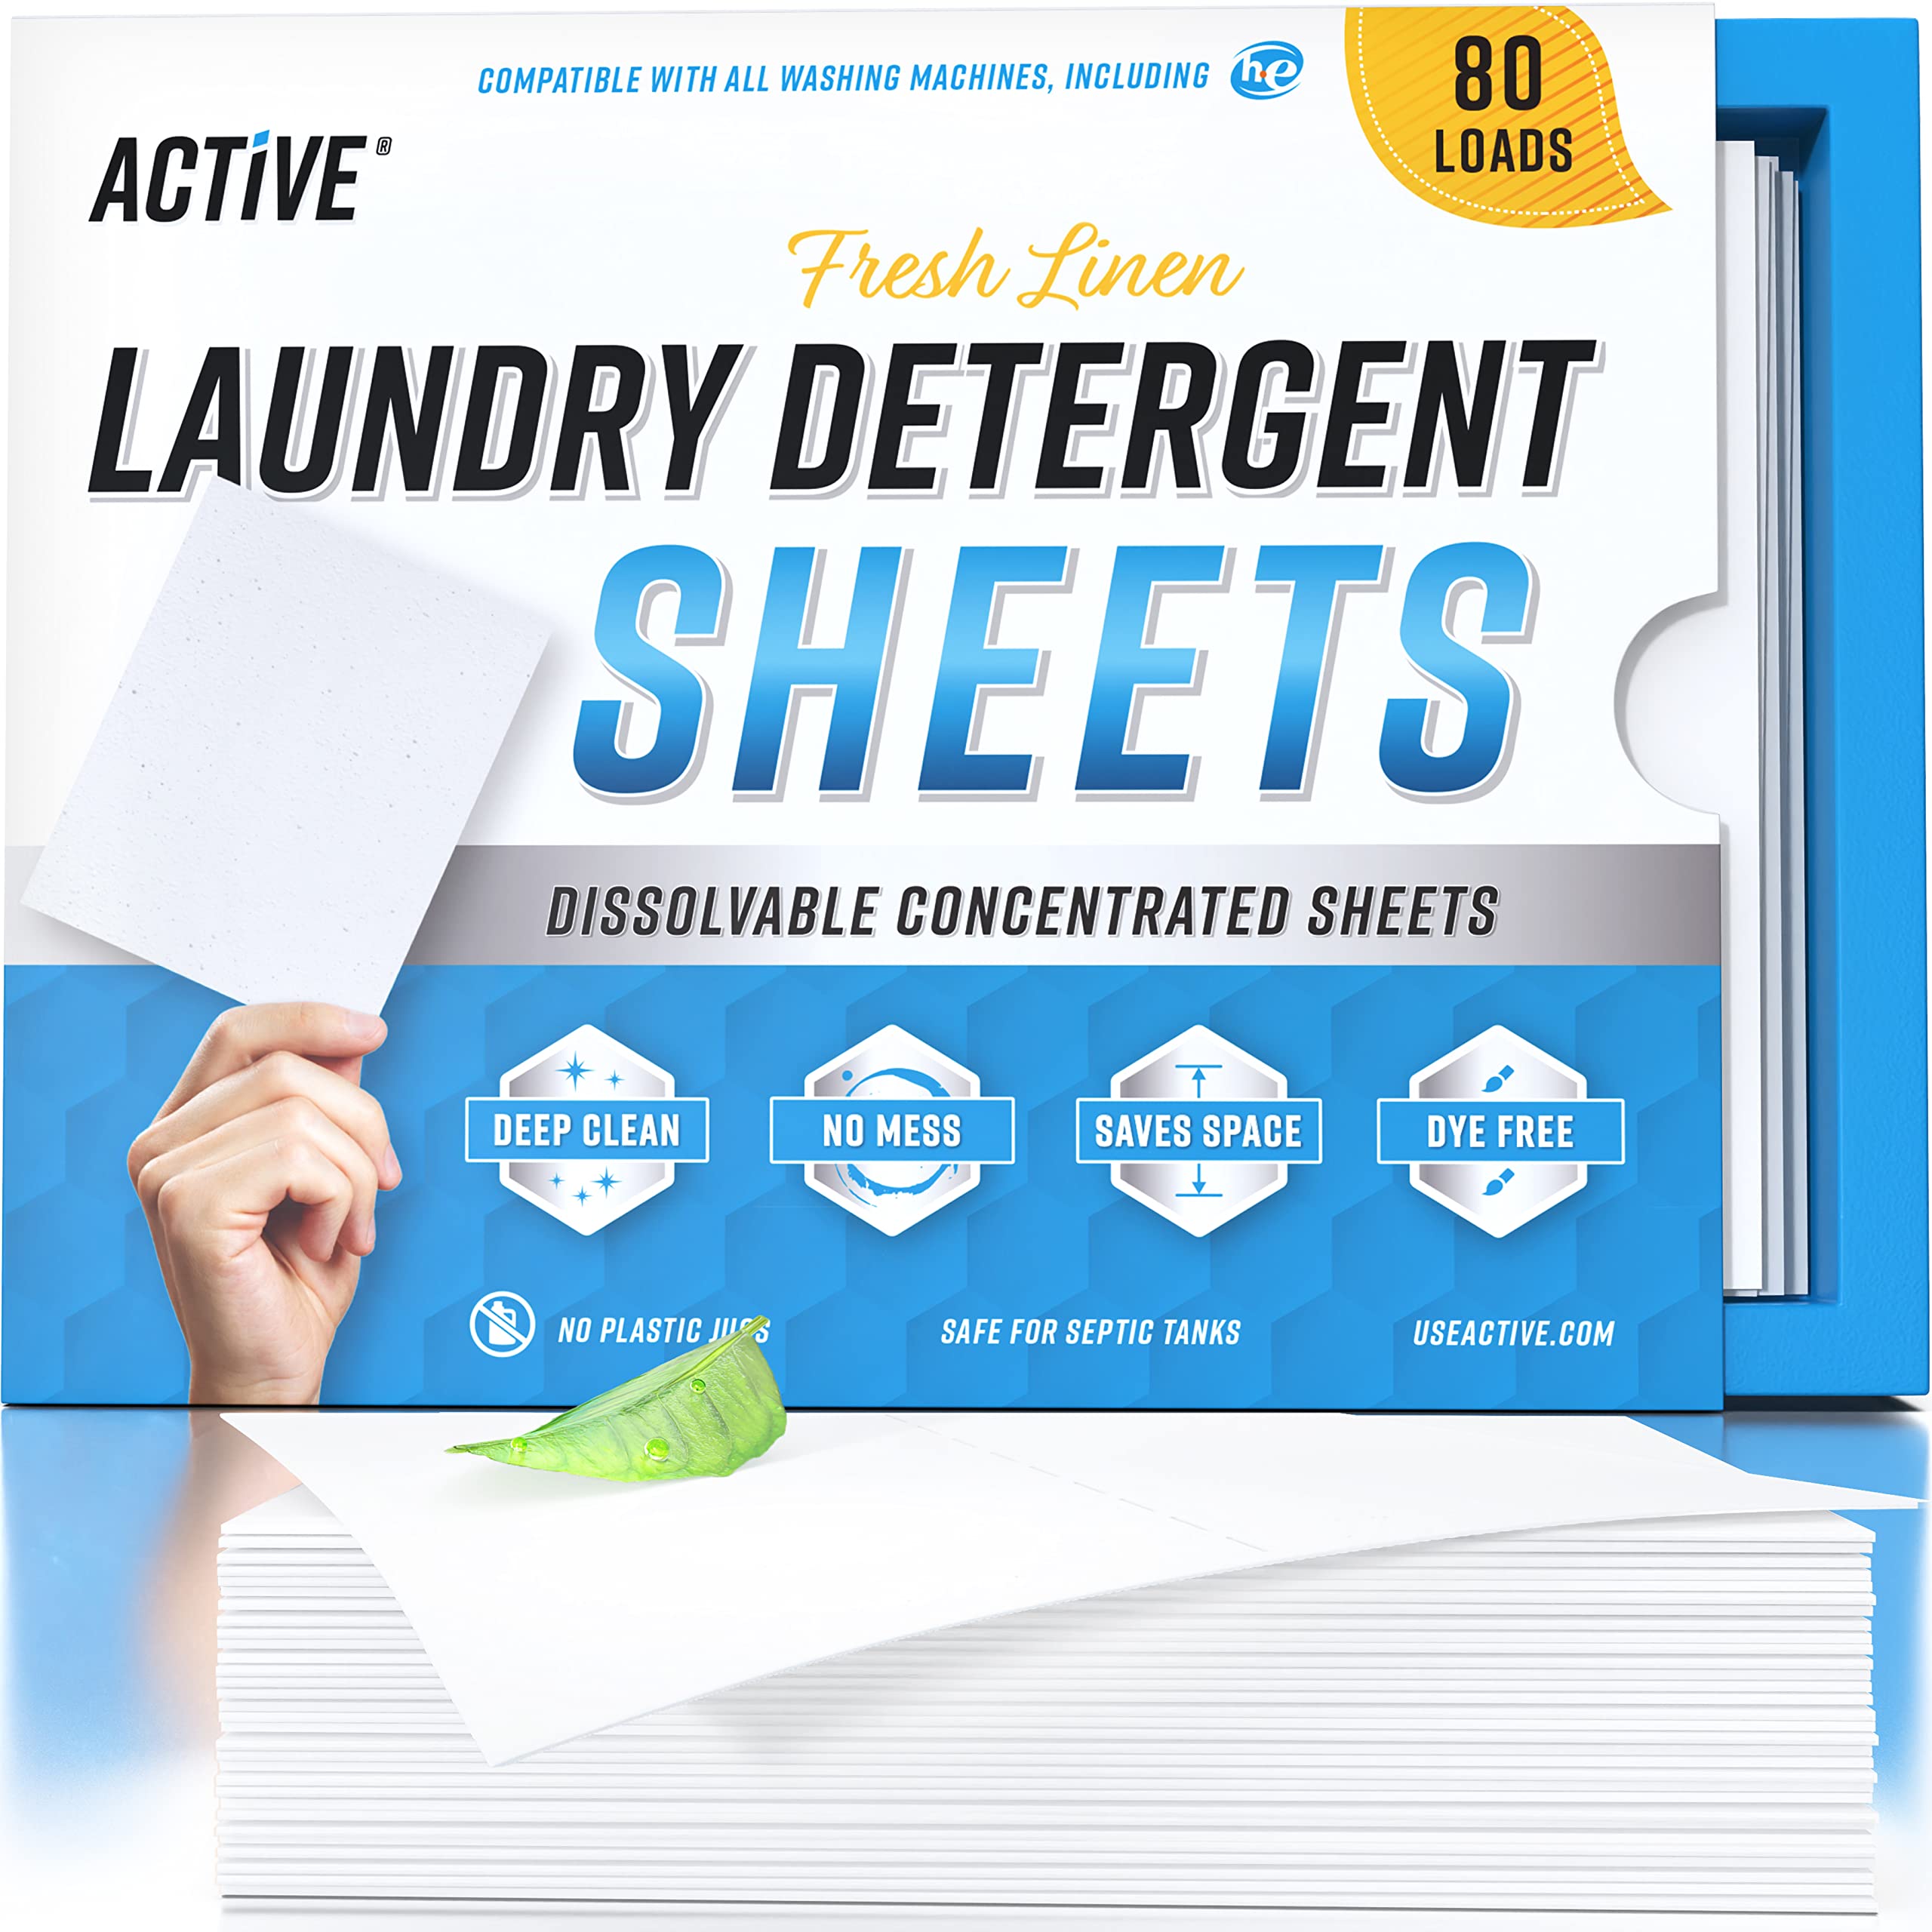 Laundry Detergent Sheets, Single Pack (40 Sheets, 80 Loads)